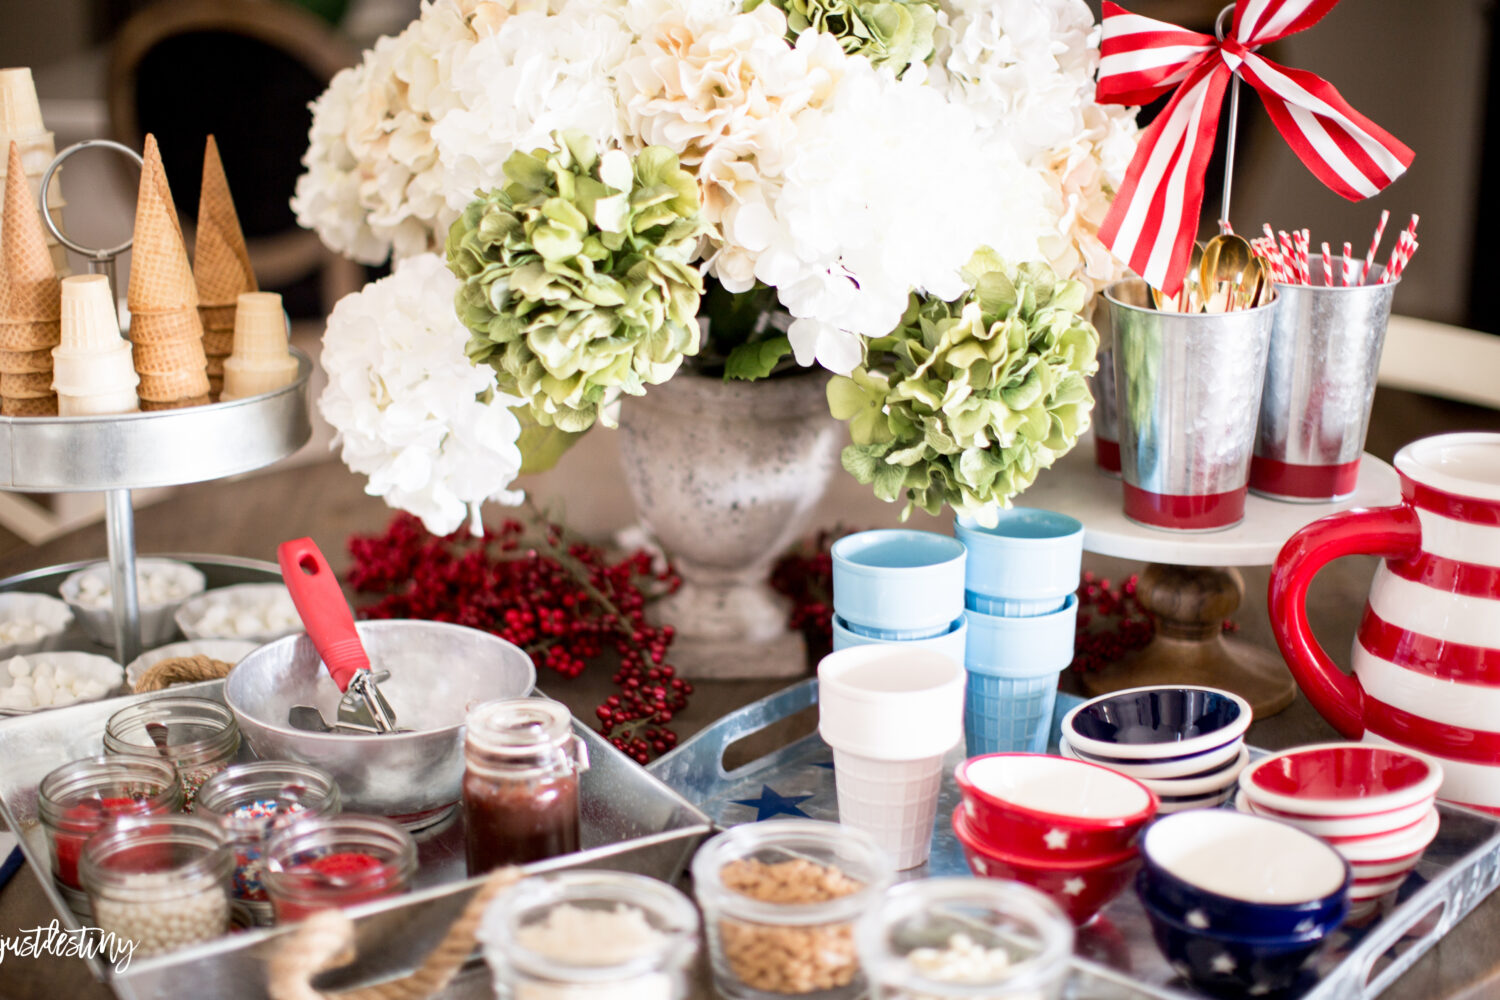 Summer Party Ideas: Red, White and Blue Ice Cream Social